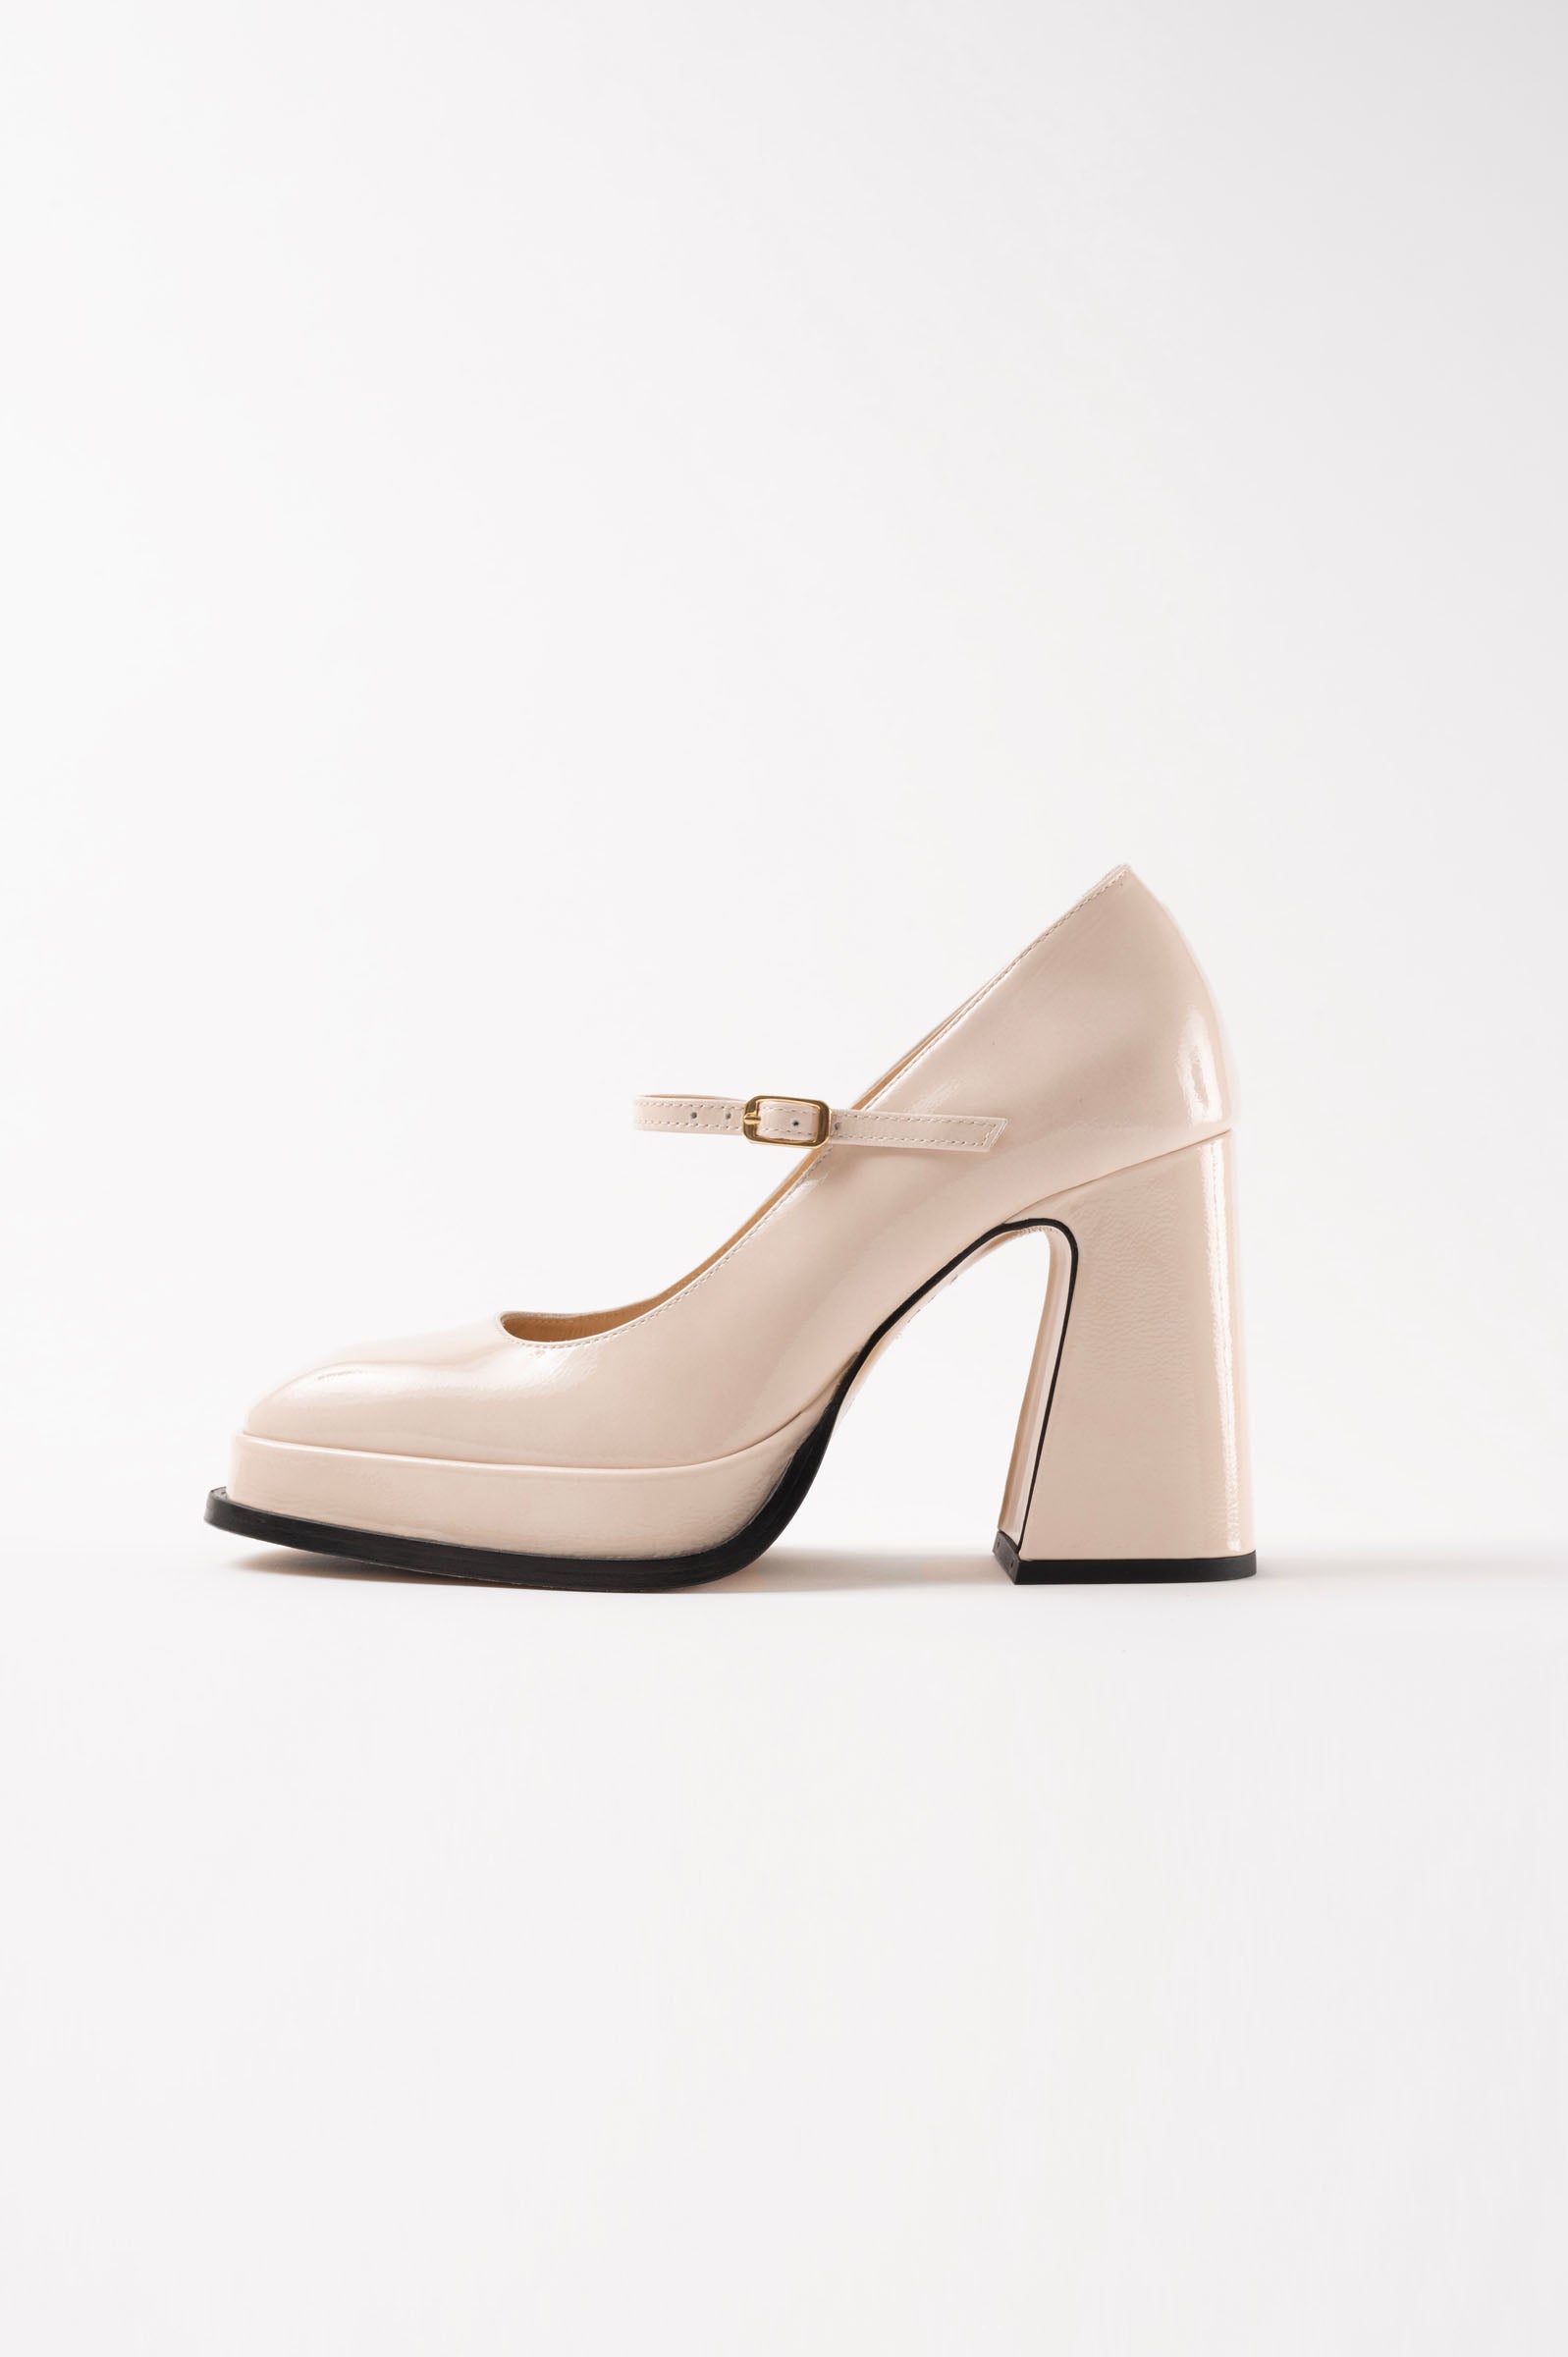 CASILDA - Off-White Patent Leather Mary Jane Pumps – Souliers Martinez